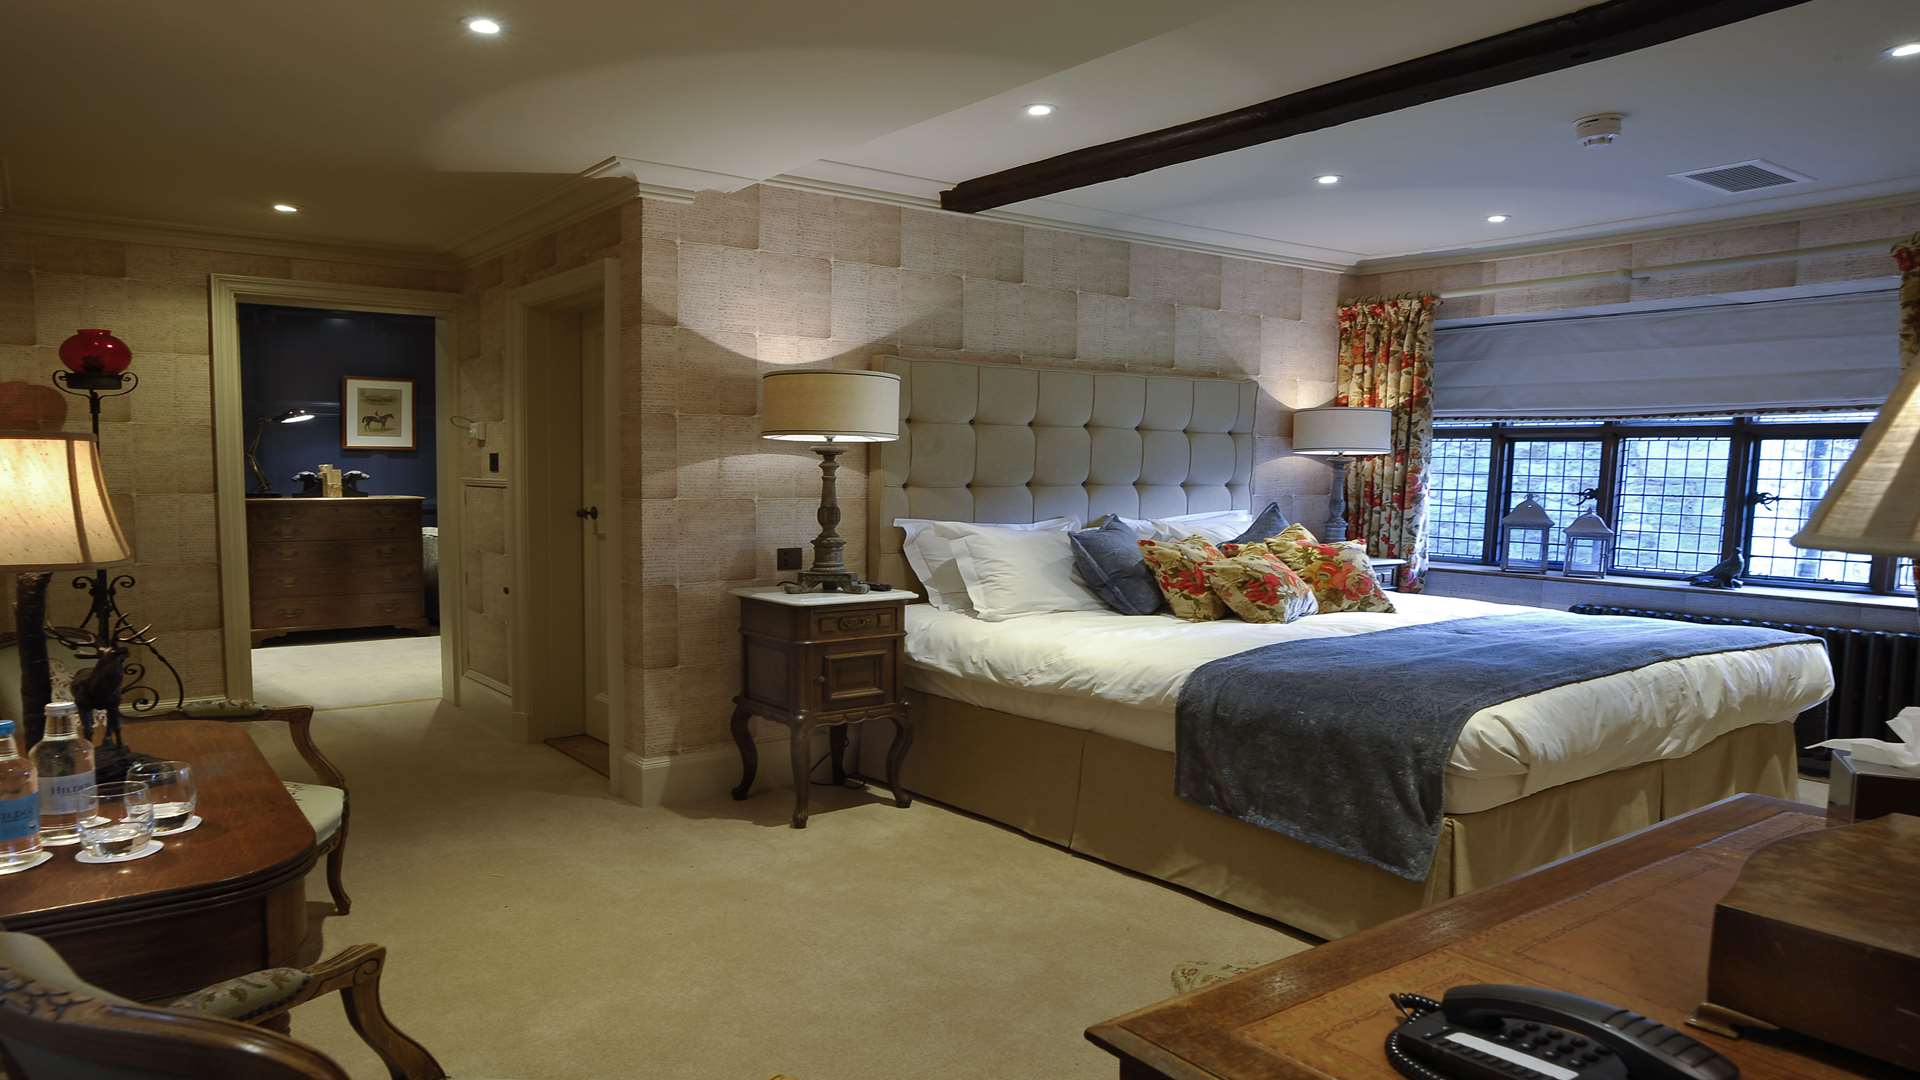 The luxury B&B at Hever Castle